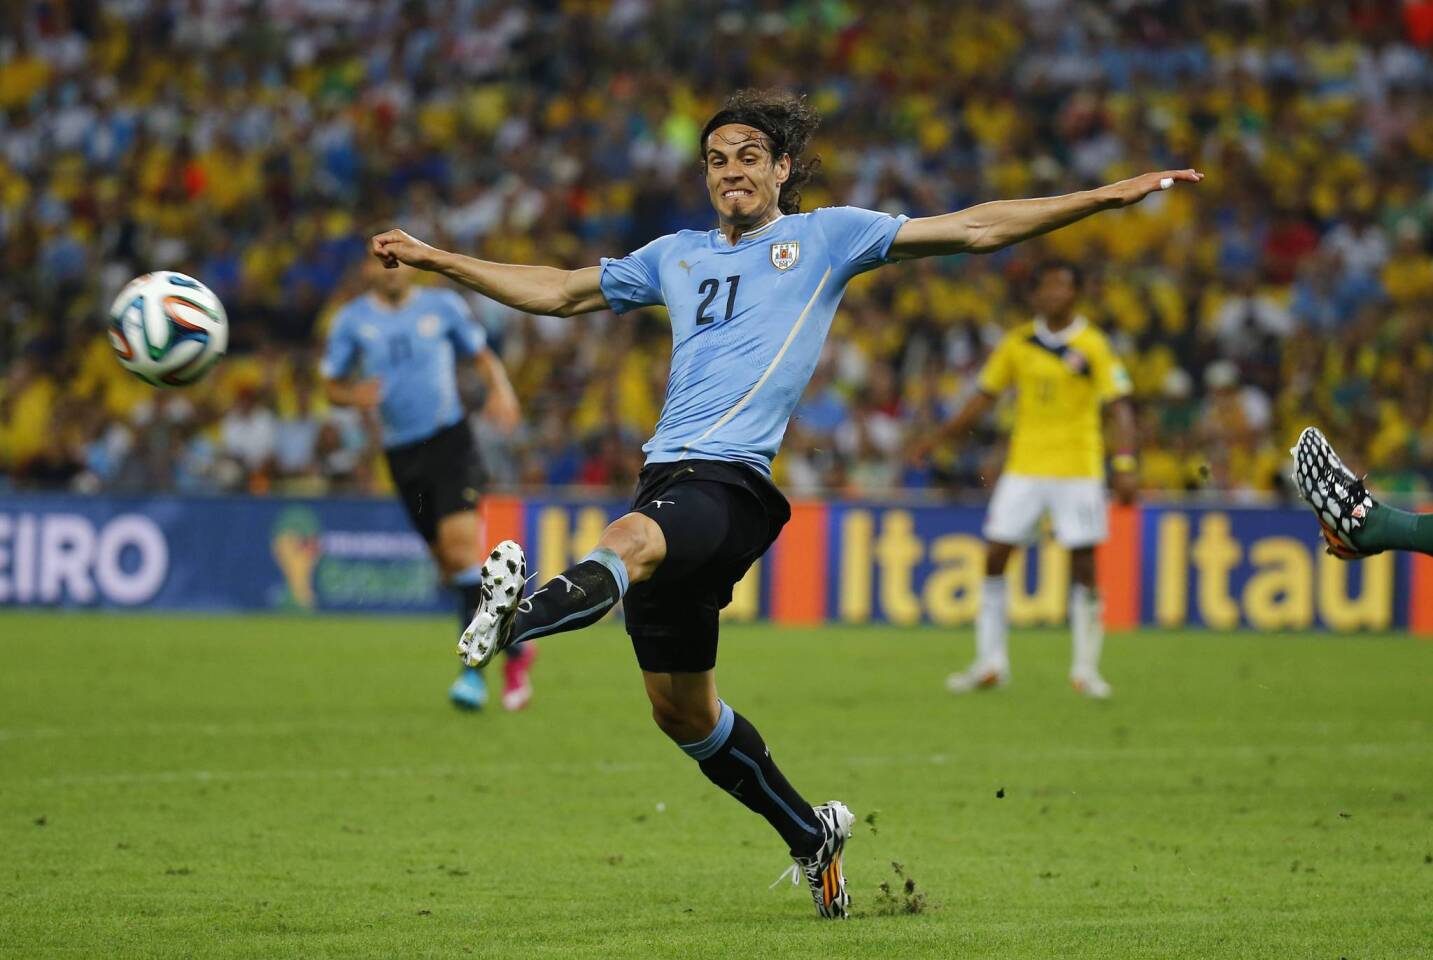 Uruguay's Cavani kicks the ball during their 2014 World Cup round of 16 game against Colombia at the Maracana stadium in Rio de Janeiro